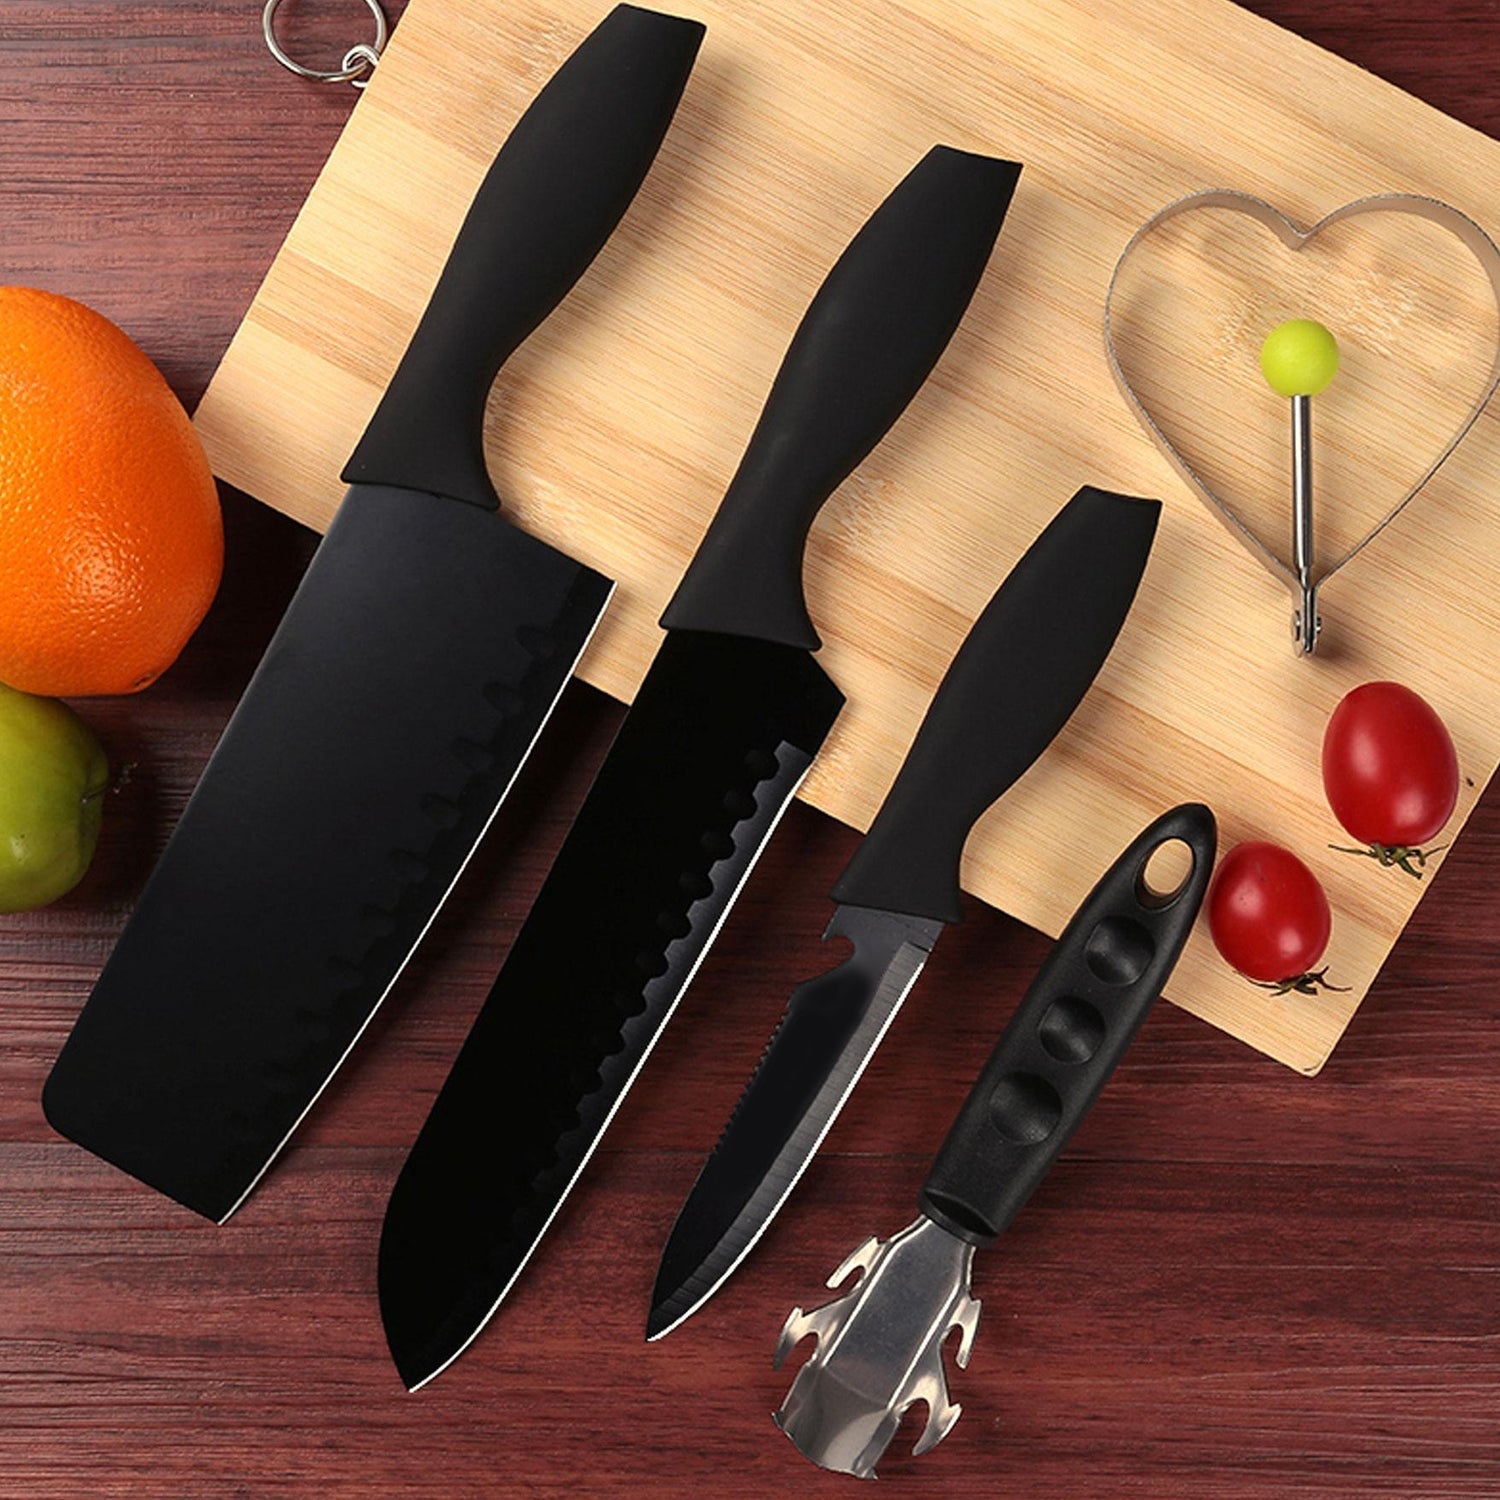 5911 Kitchen Chef Cutlery Stainless Steel Knife Set, Chopping Knife, Chef Knife, Utility Knife, Butcher Knife (Pack of 5pc). JK Trends